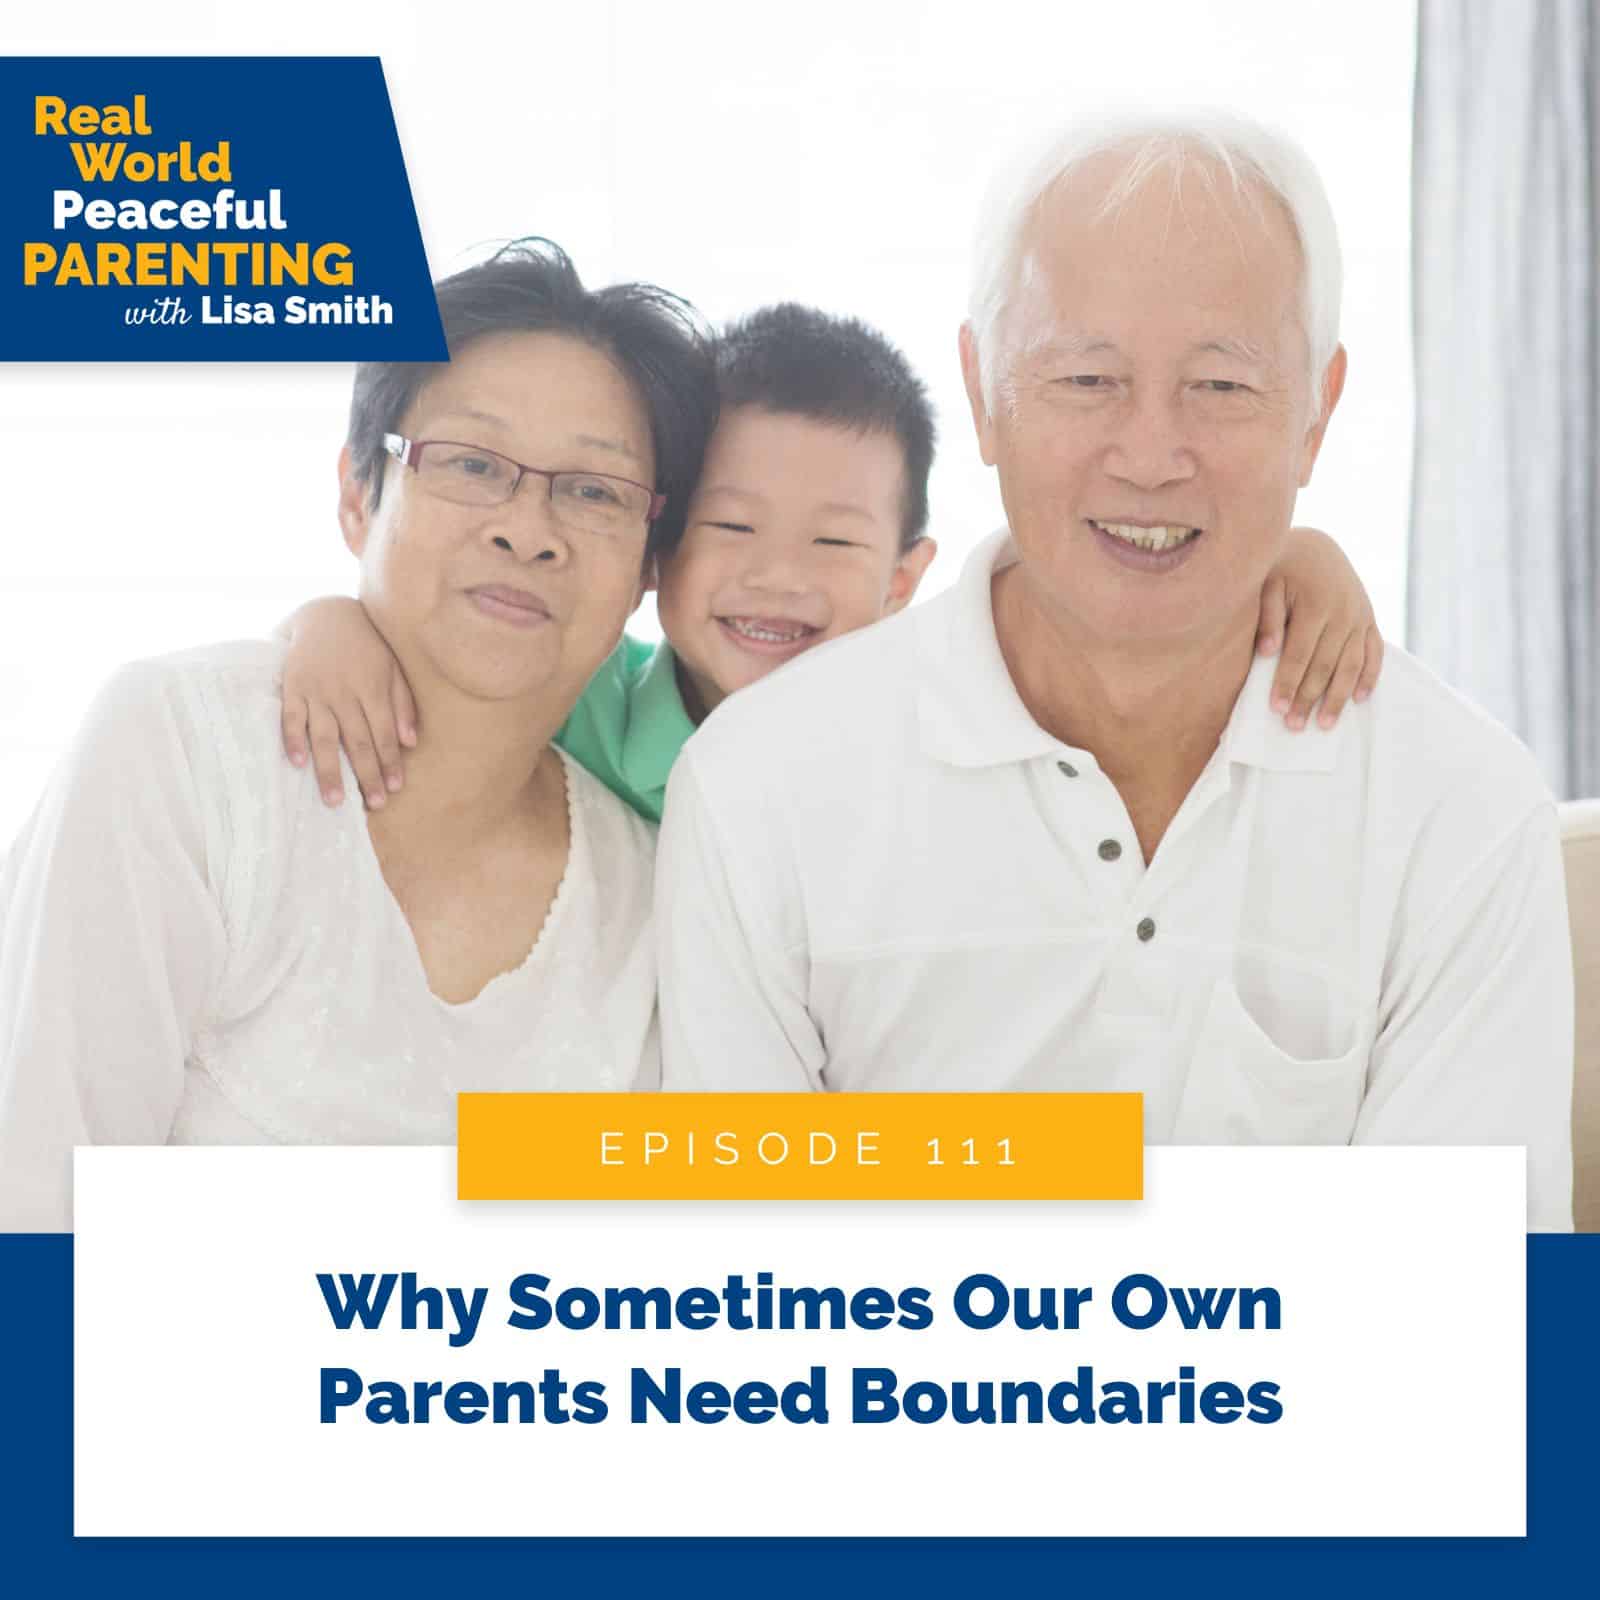 Real World Peaceful Parenting Lisa Smith | Why Sometimes Our Own Parents Need Boundaries